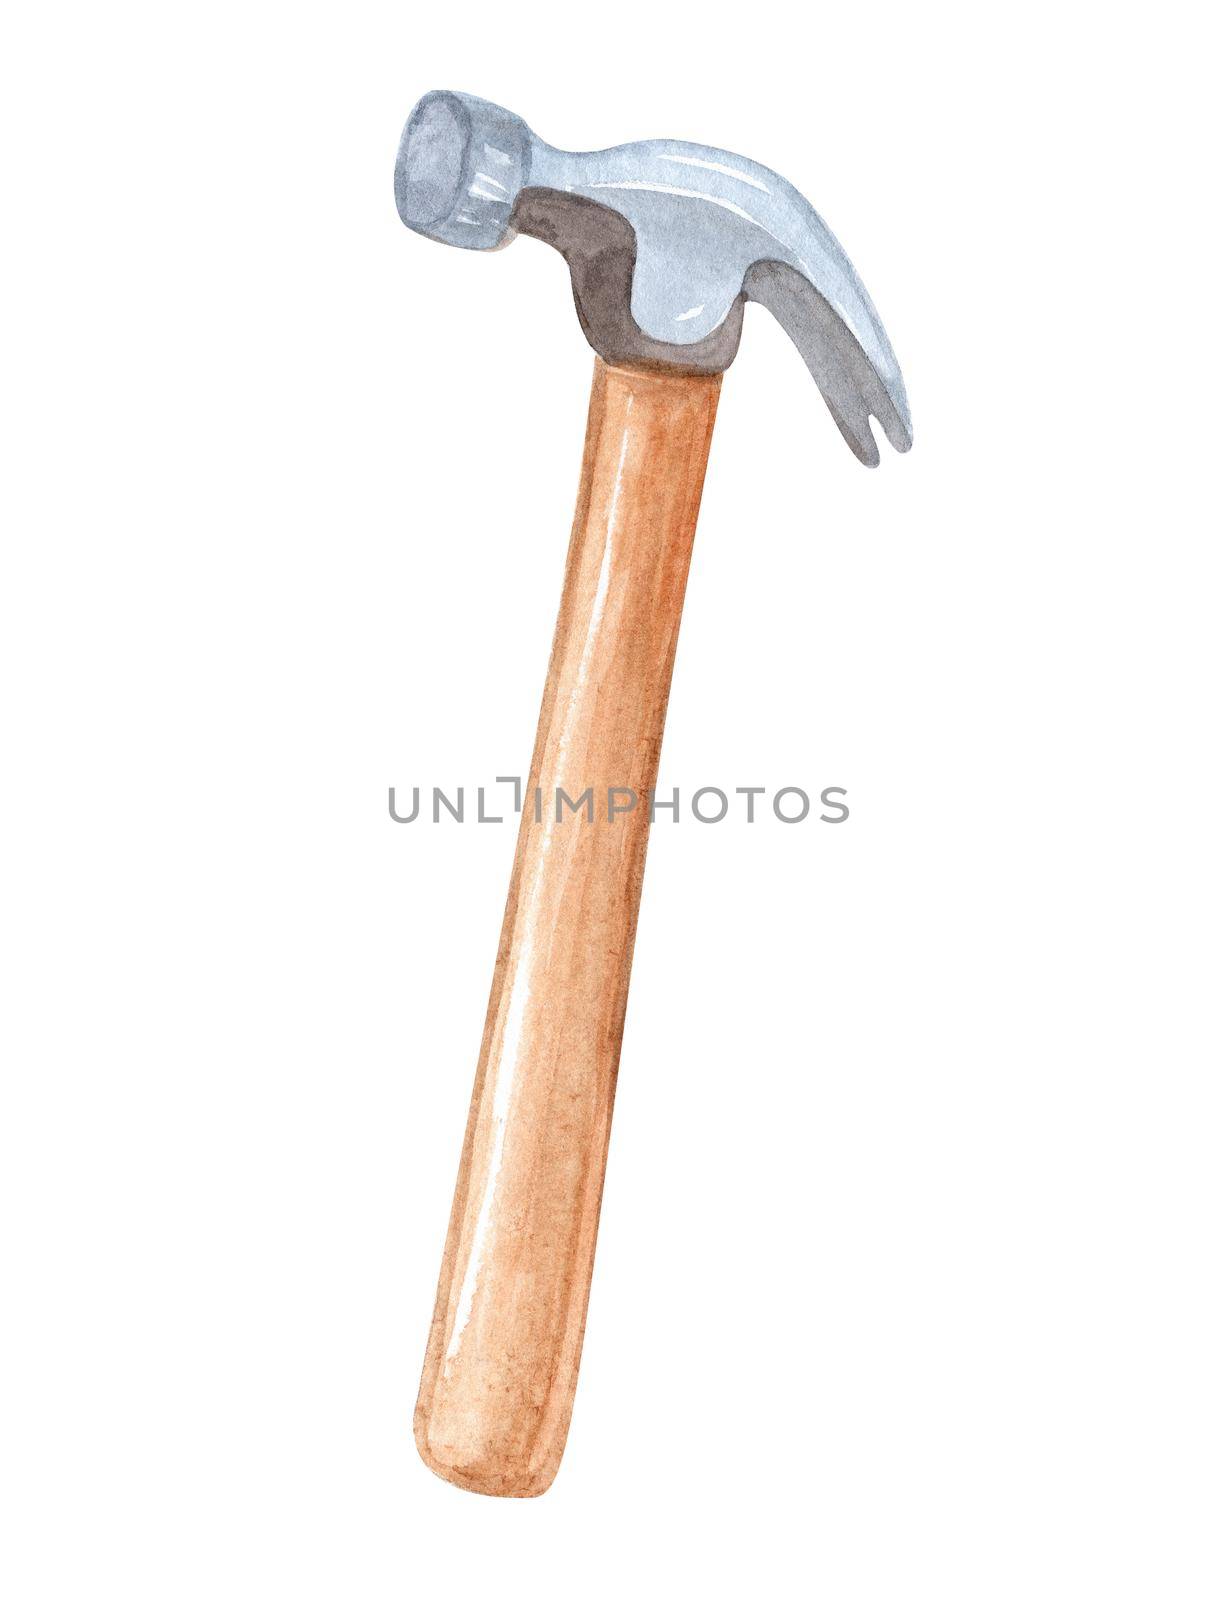 watercolor hammer tool isolated on white background